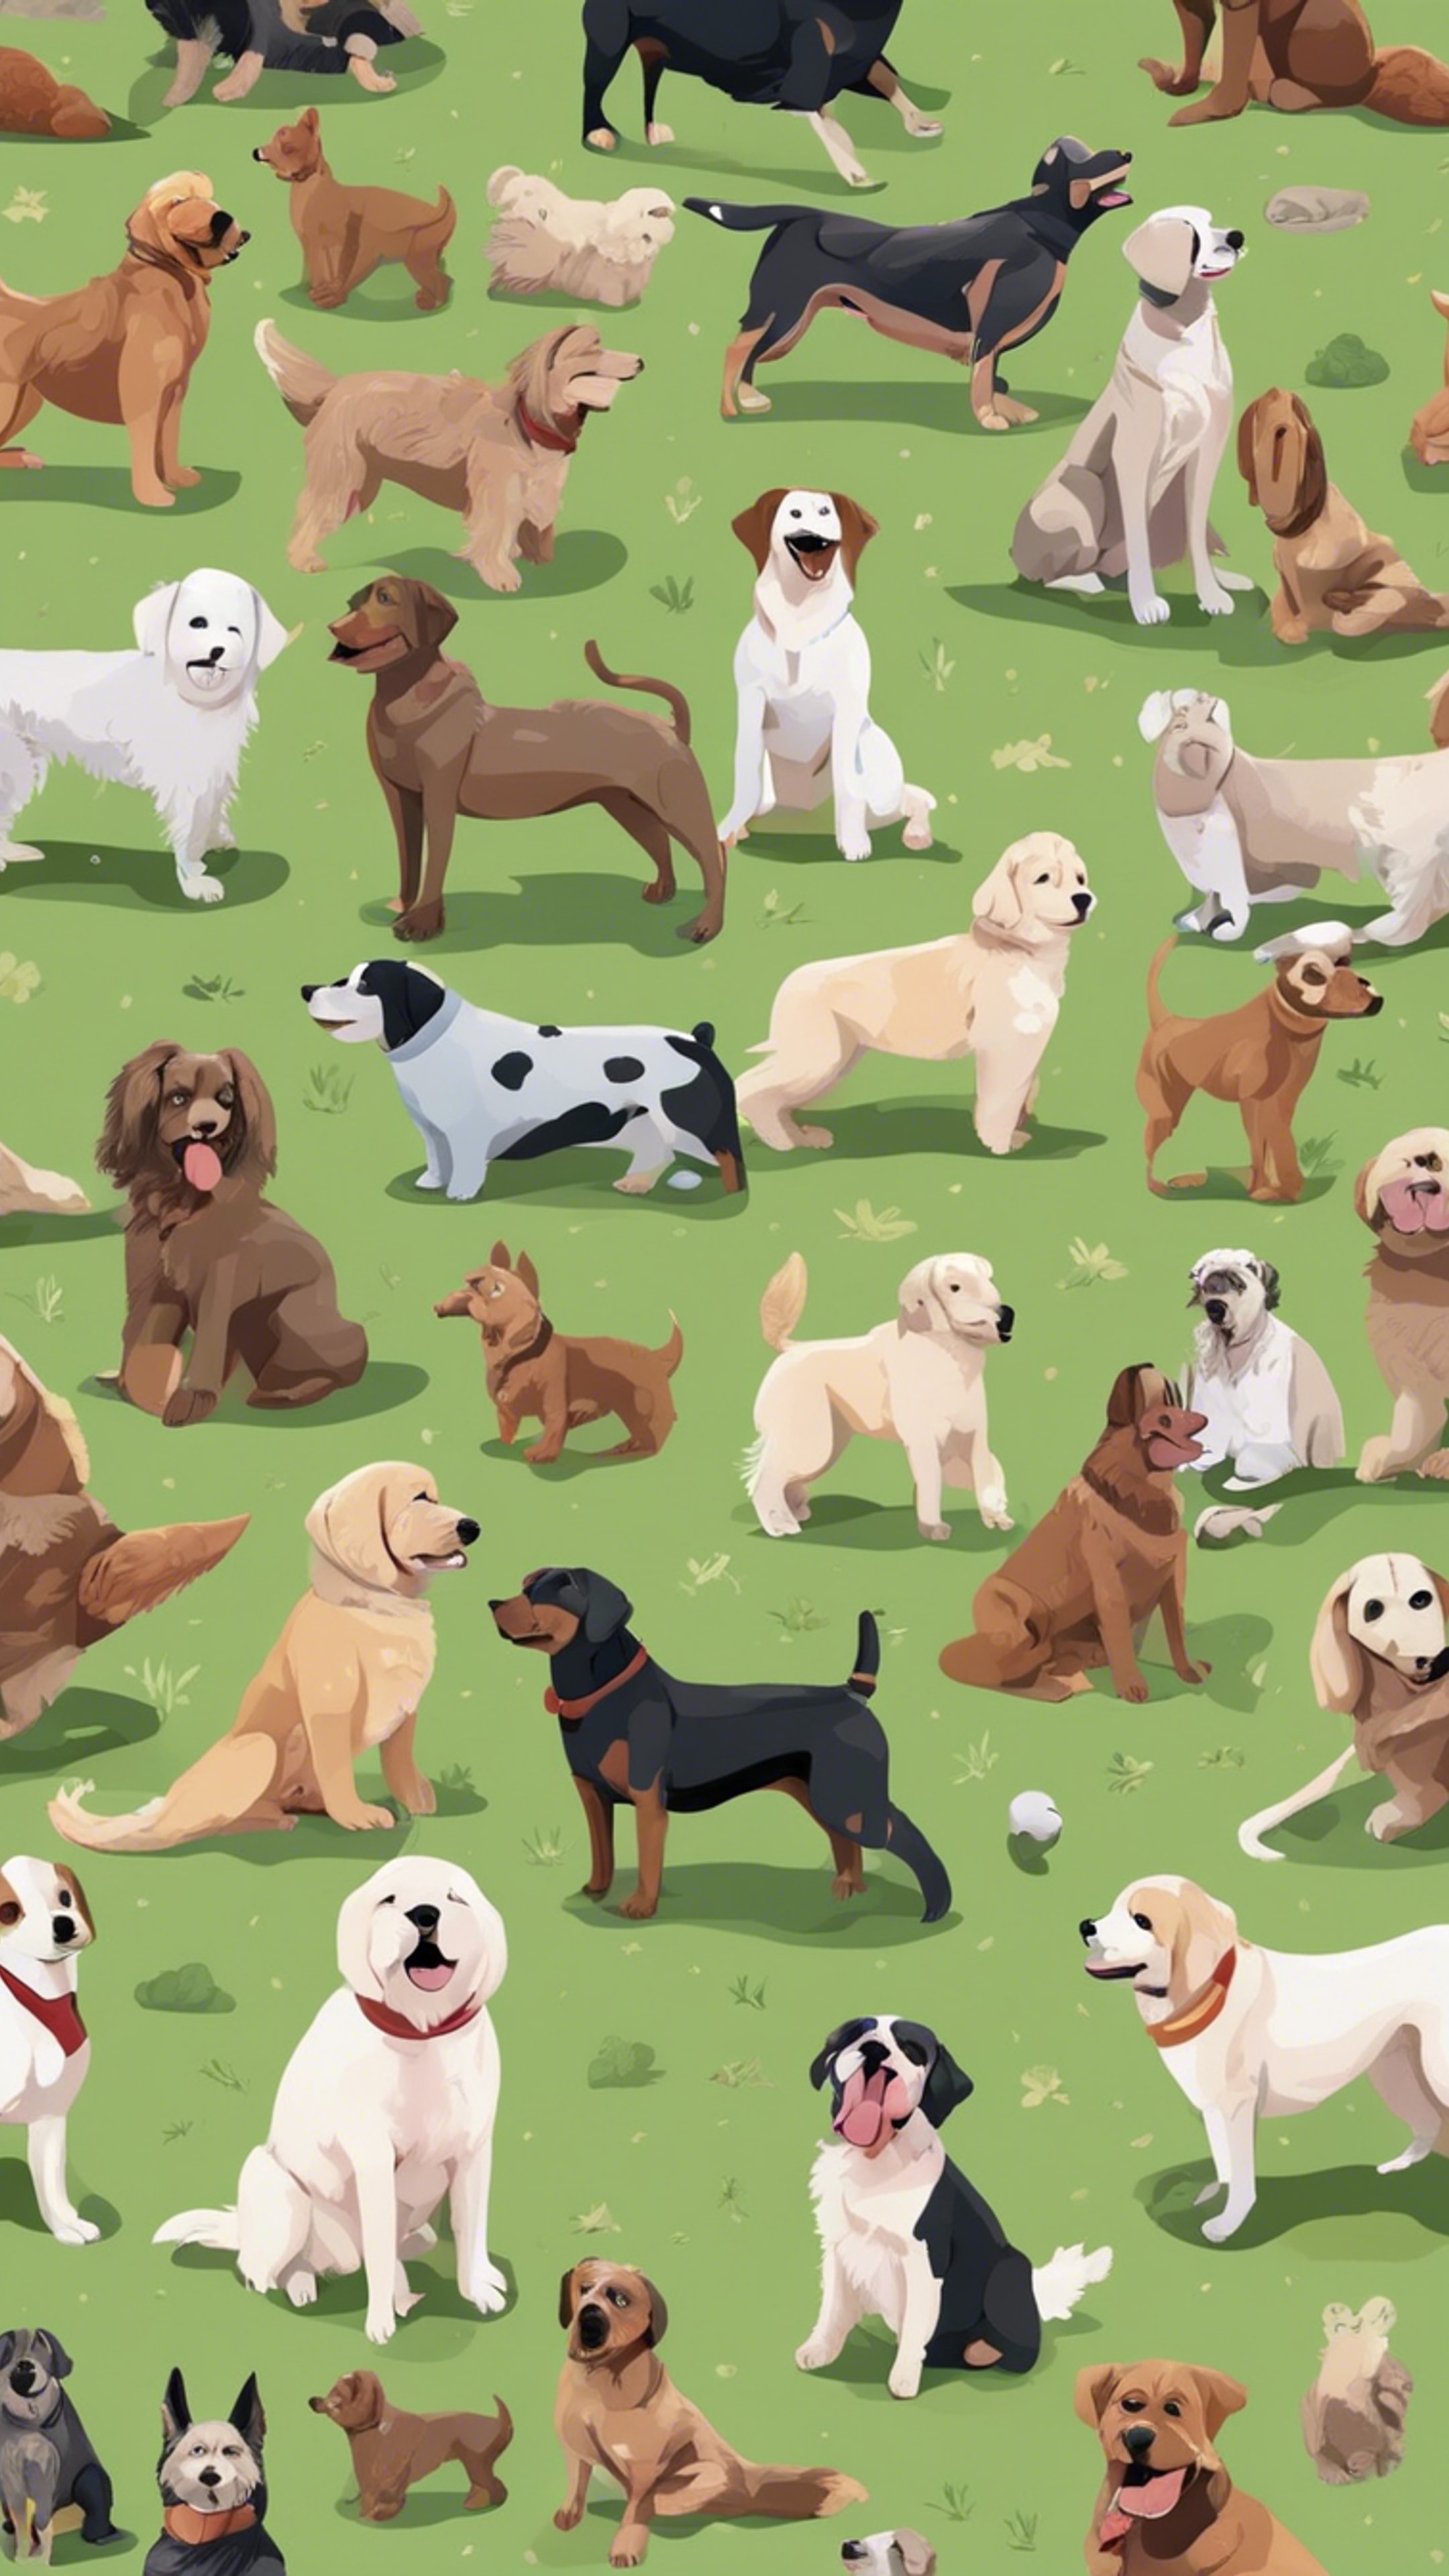 Seamless pattern of various breed of dogs playing in a park. Tapeta[140058c252ce4edb8a7a]